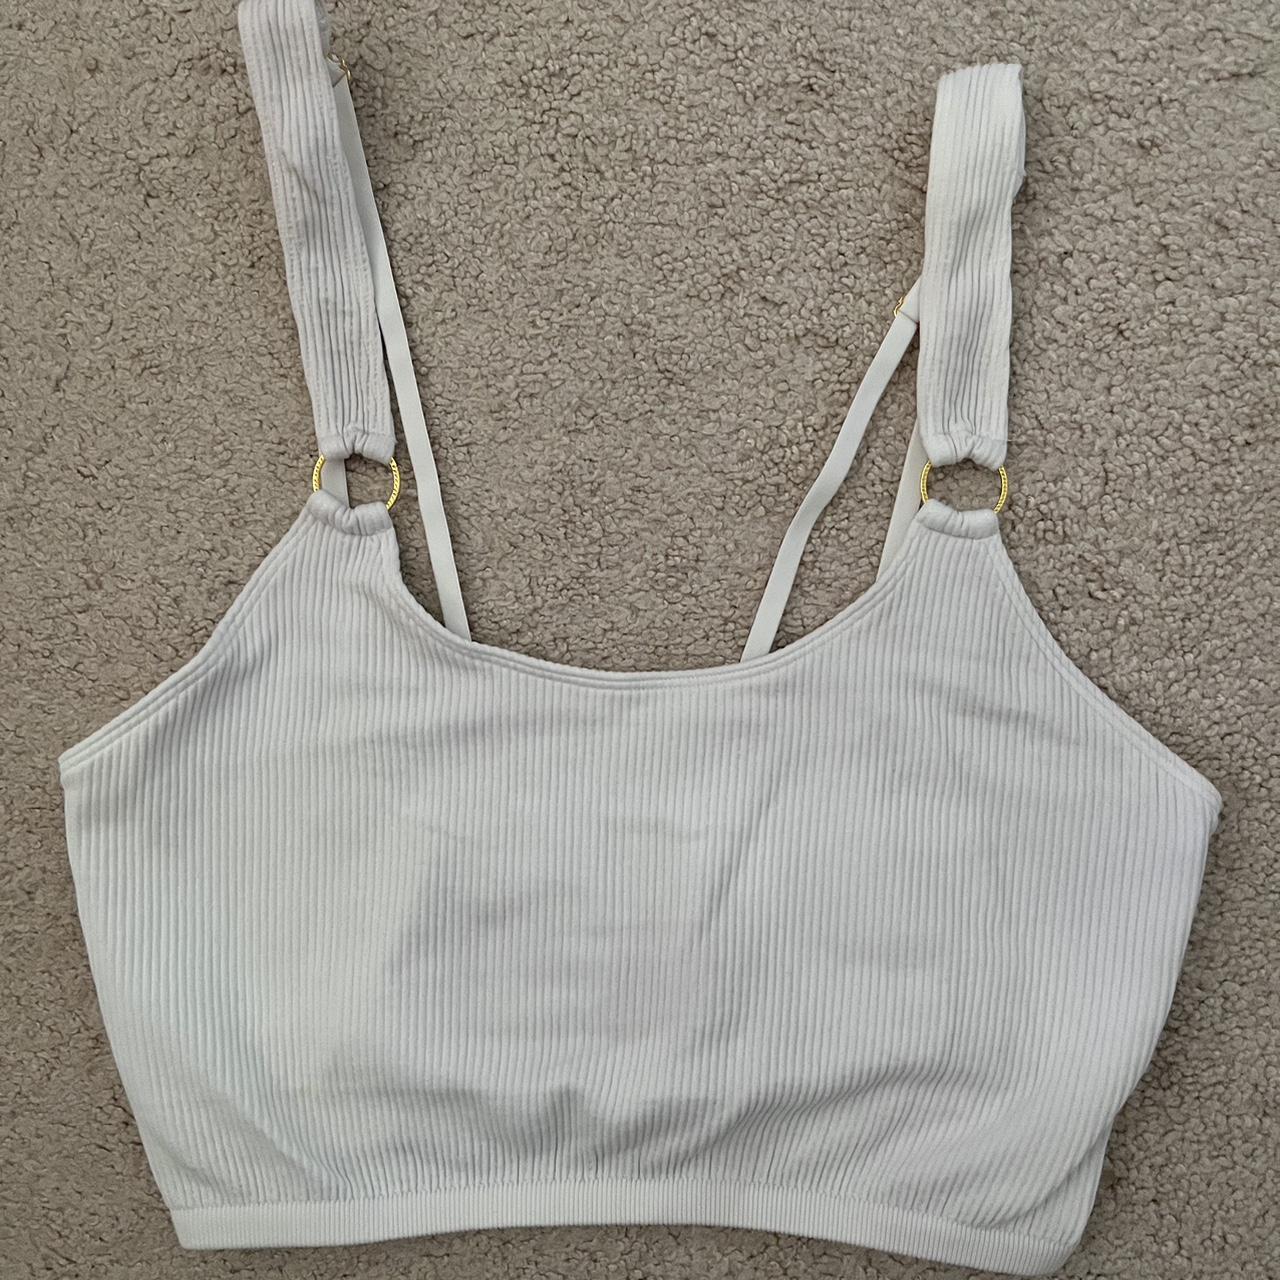 Aerie ribbed bralette White with gold hardware - Depop